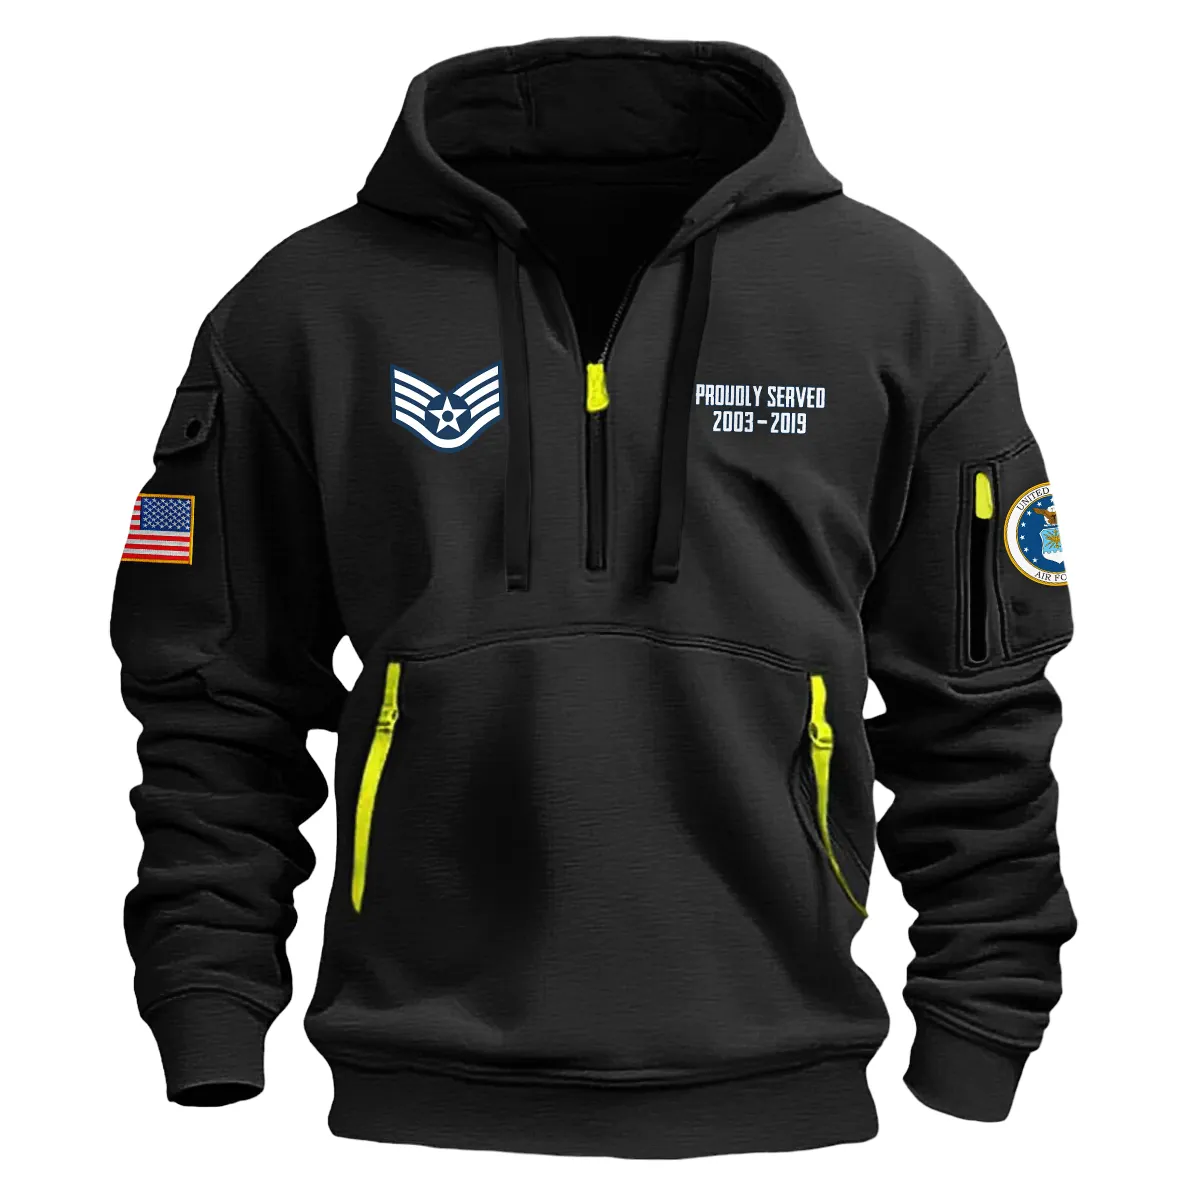 US Military All Branches! Personalized Gift E5-SSGT U.S. Air Force Fashion Hoodie Half Zipper